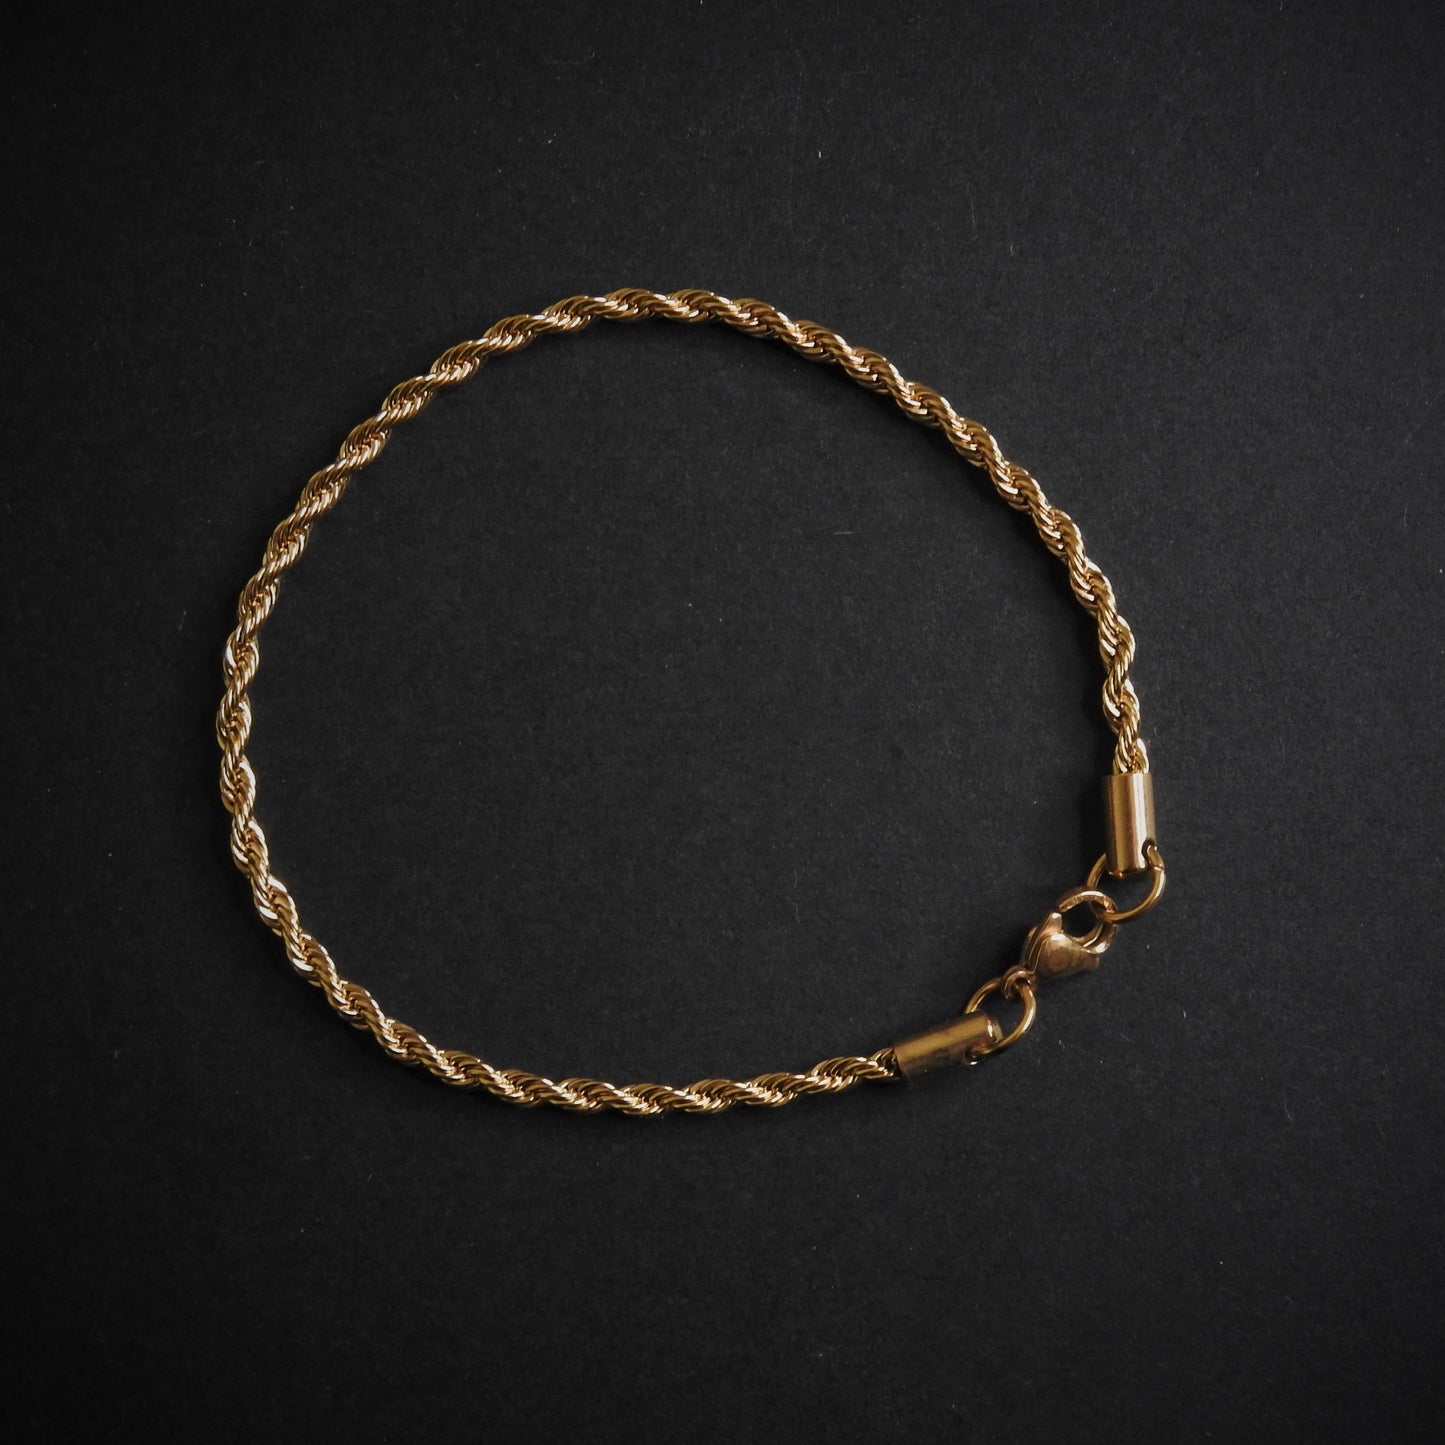 Rope chain + Pulsera 3mm - Gold Dealers